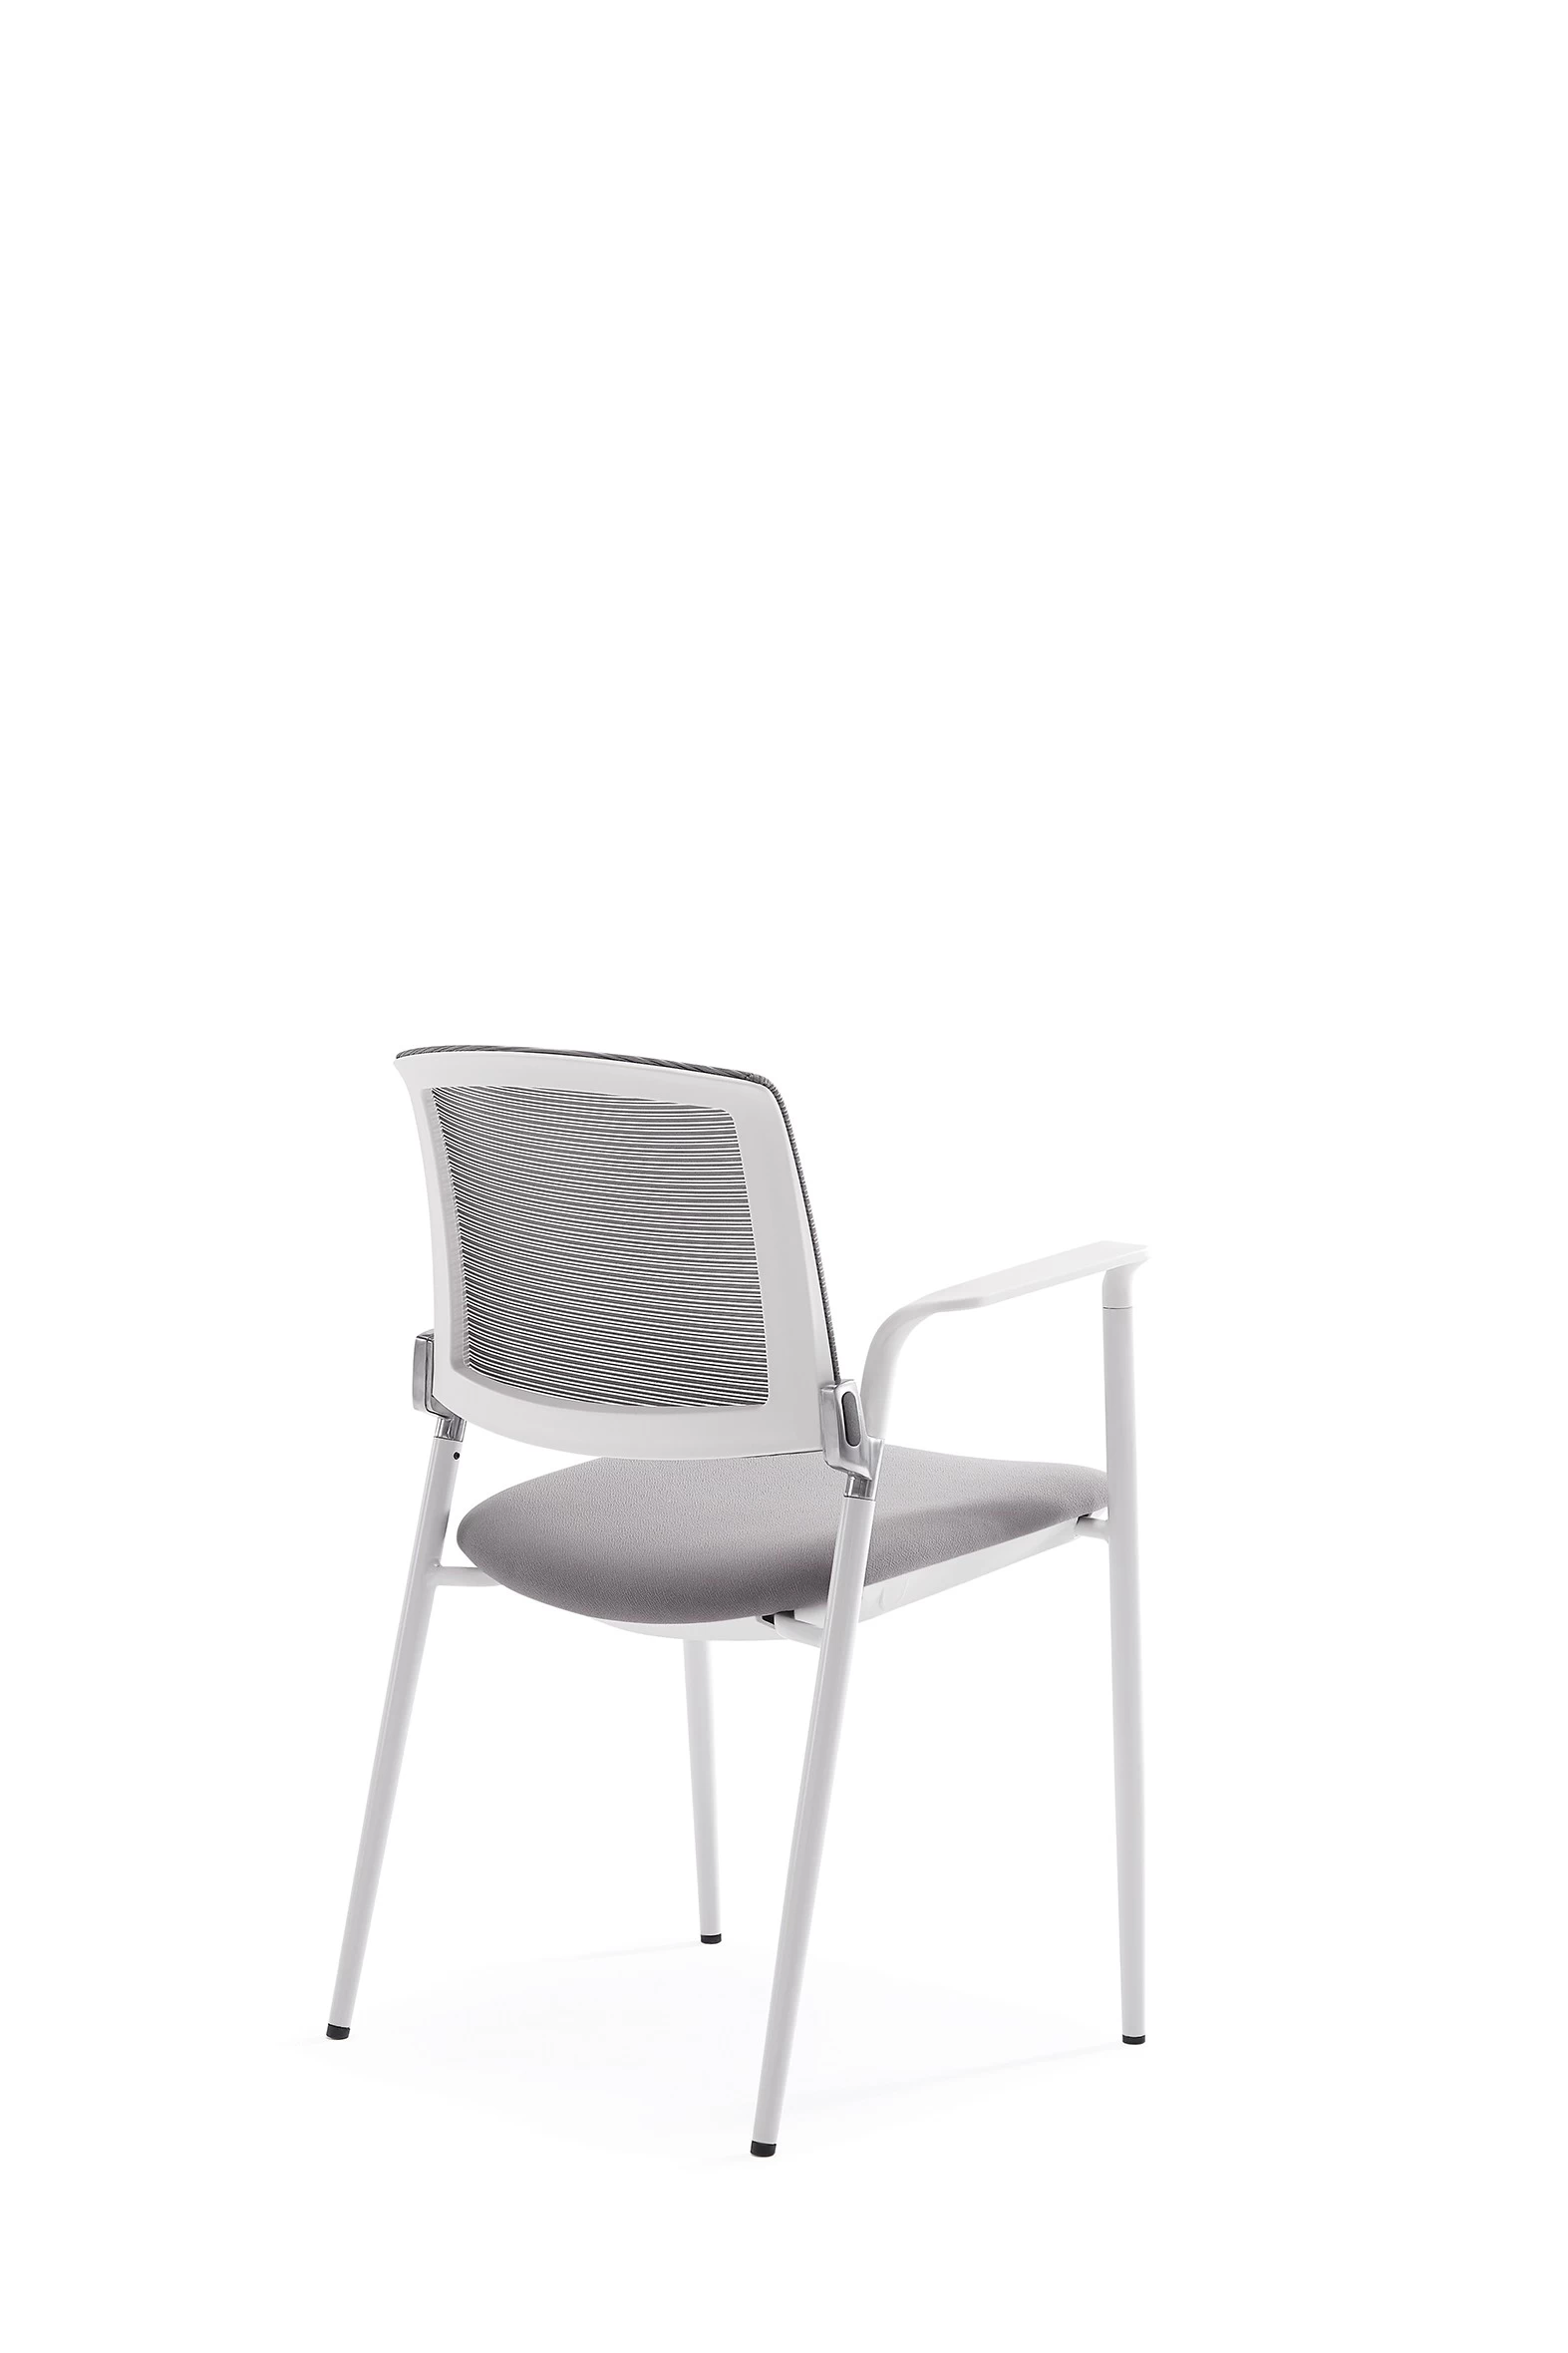 Newcity 1534 Modern Stacking Mesh Conference Training Chair Garden Furniture Training Chair Modern Fashion Training Chair High Quality Wholesale Outdoor Chair Supplier Chinese Foshan